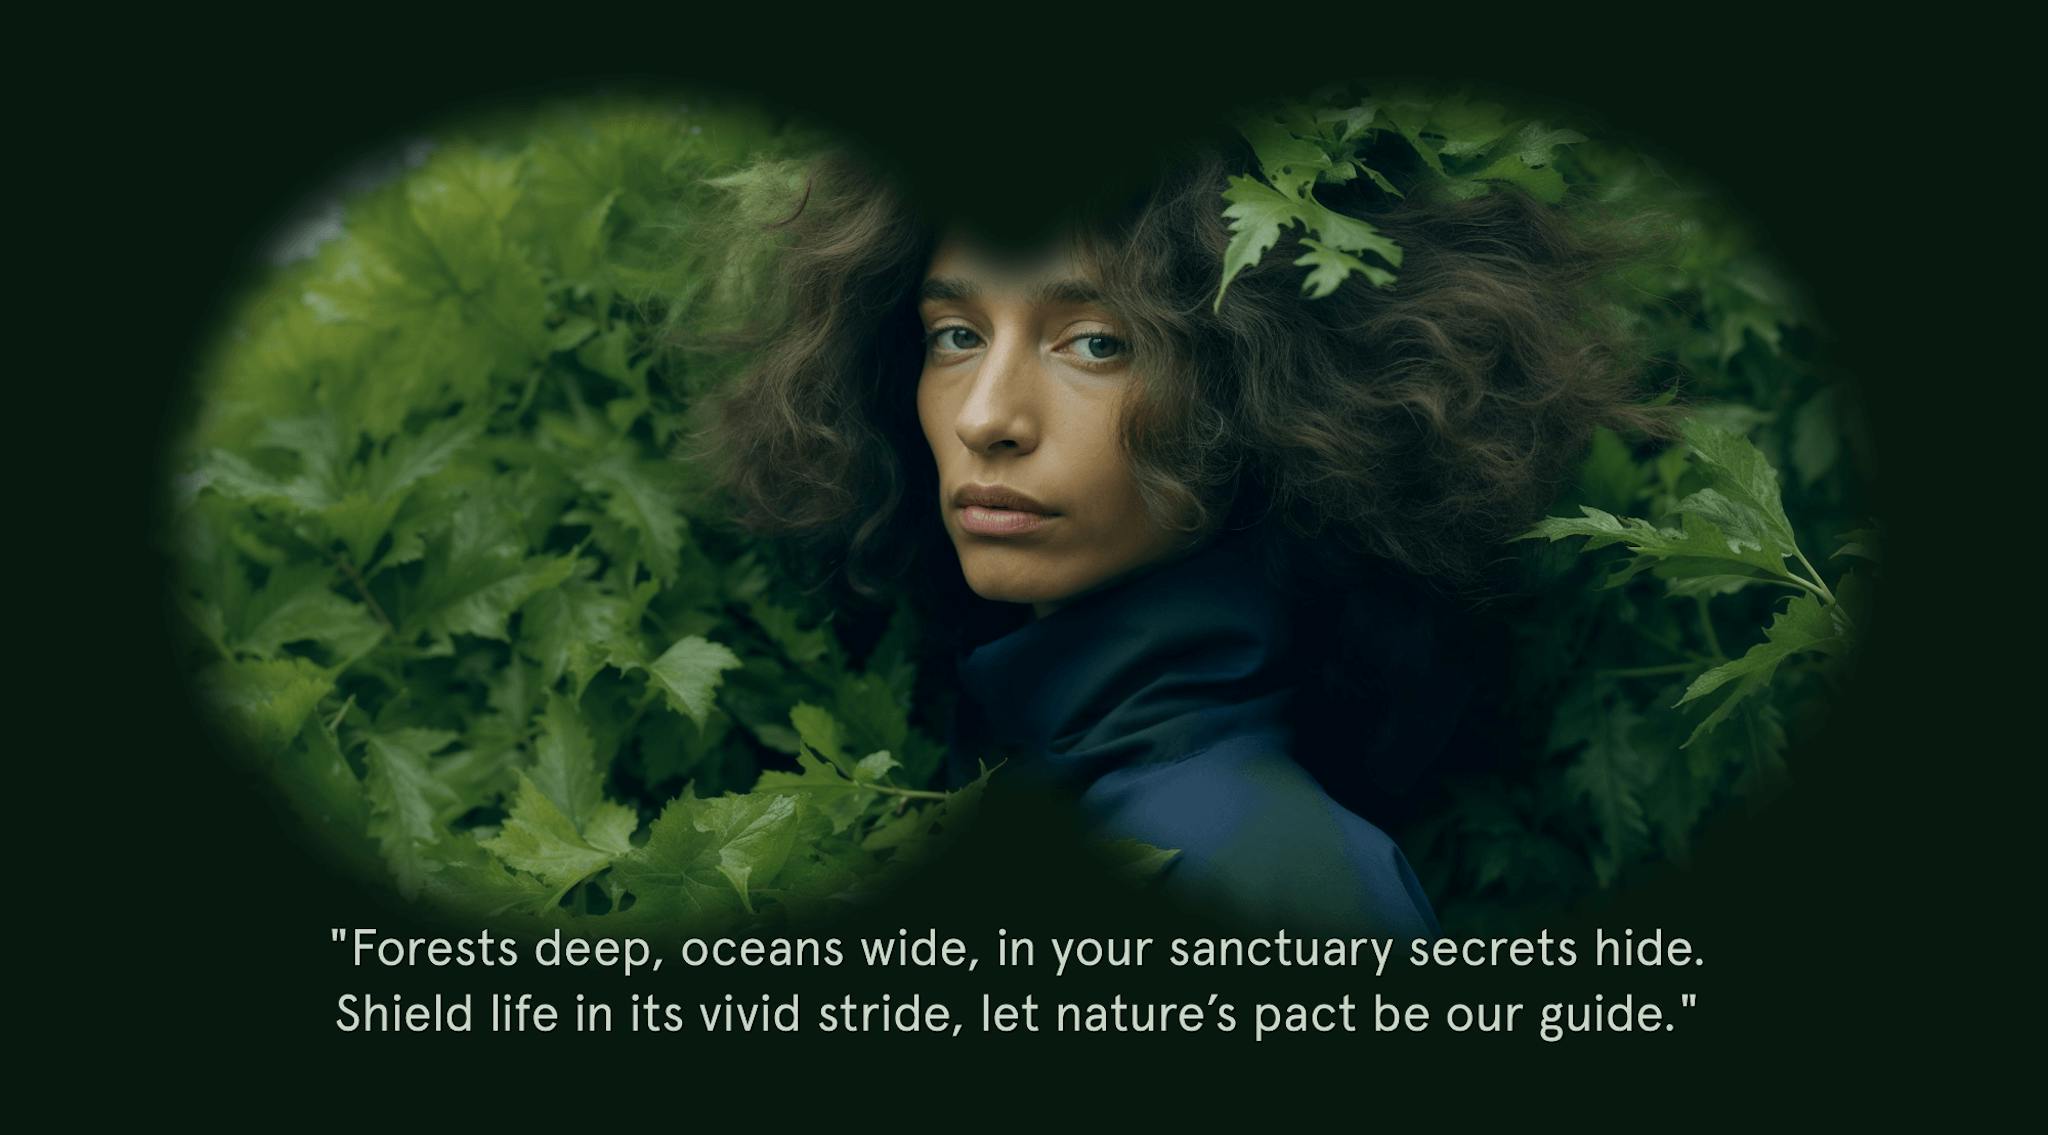 Person surrounded by lush greenery with a quote: "Forests deep, oceans wide, in your sanctuary secrets hide. Shield life in its vivid stride, let nature’s pact be our guide."